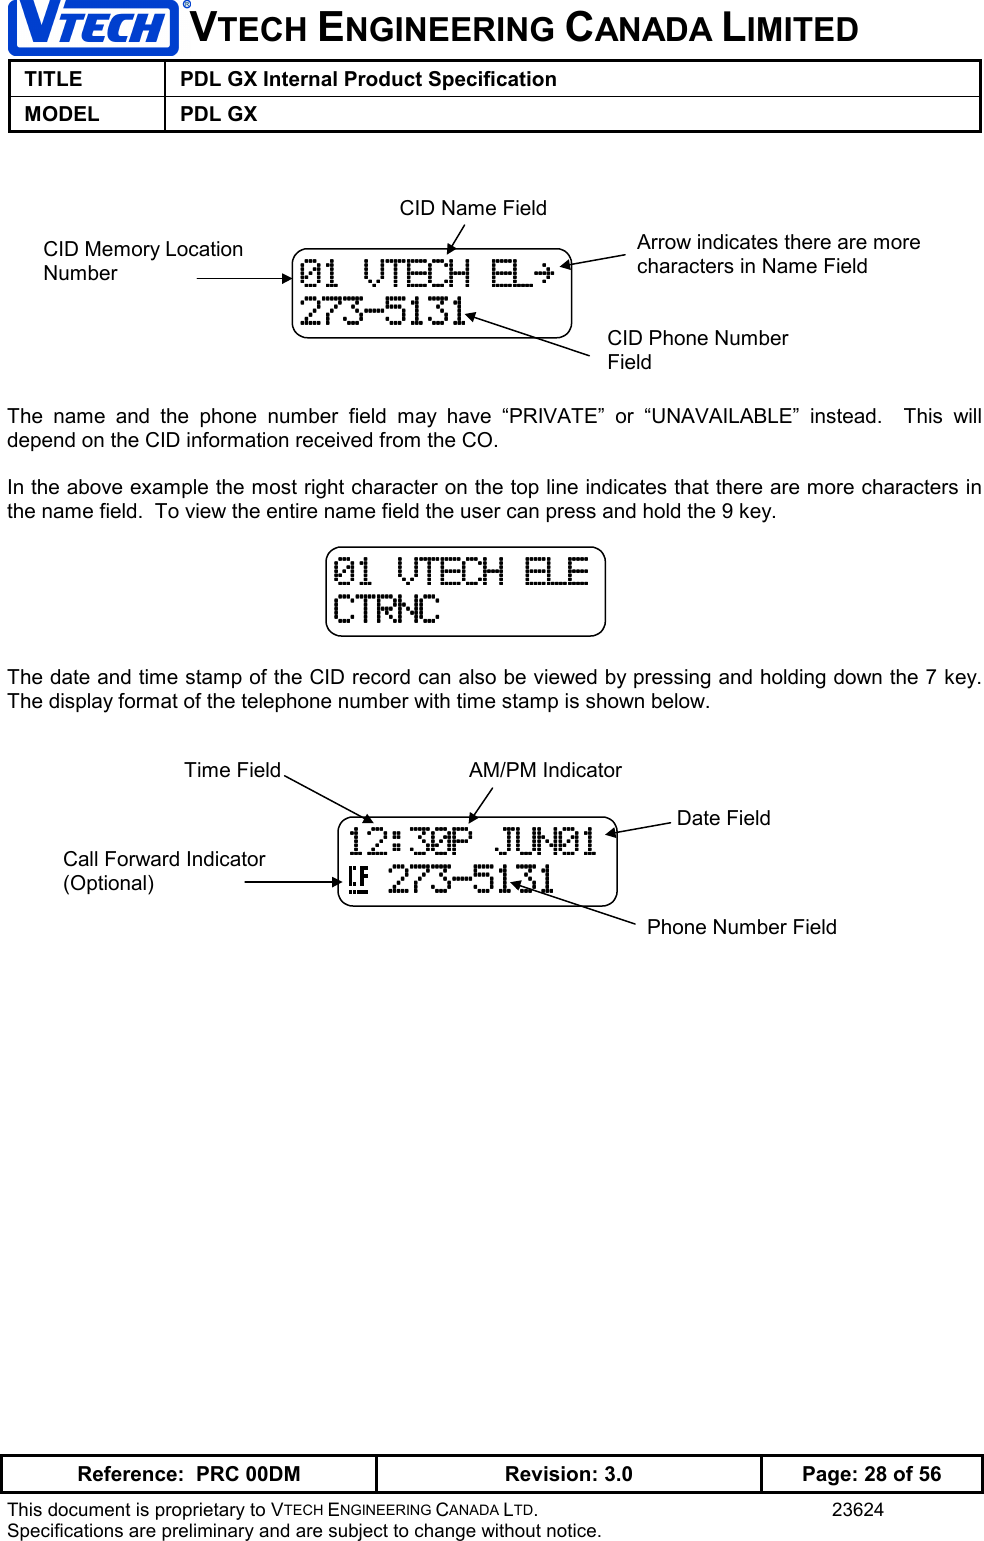 VTECH ENGINEERING CANADA LIMITEDTITLE PDL GX Internal Product SpecificationMODEL PDL GXReference:  PRC 00DM Revision: 3.0 Page: 28 of 56This document is proprietary to VTECH ENGINEERING CANADA LTD. 23624Specifications are preliminary and are subject to change without notice.The name and the phone number field may have “PRIVATE” or “UNAVAILABLE” instead.  This willdepend on the CID information received from the CO.In the above example the most right character on the top line indicates that there are more characters inthe name field.  To view the entire name field the user can press and hold the 9 key.The date and time stamp of the CID record can also be viewed by pressing and holding down the 7 key.The display format of the telephone number with time stamp is shown below.01 VTECH ELE01 VTECH ELE01 VTECH ELE01 VTECH ELECTRNCCTRNCCTRNCCTRNCArrow indicates there are morecharacters in Name Field01010101    VTECH EL~VTECH EL~VTECH EL~VTECH EL~273-5131273-5131273-5131273-5131CID Memory LocationNumberCID Name FieldCID Phone NumberField12:30P JUN0112:30P JUN0112:30P JUN0112:30P JUN01  273-5131  273-5131  273-5131  273-5131Time FieldDate FieldPhone Number FieldAM/PM IndicatorCall Forward Indicator(Optional)